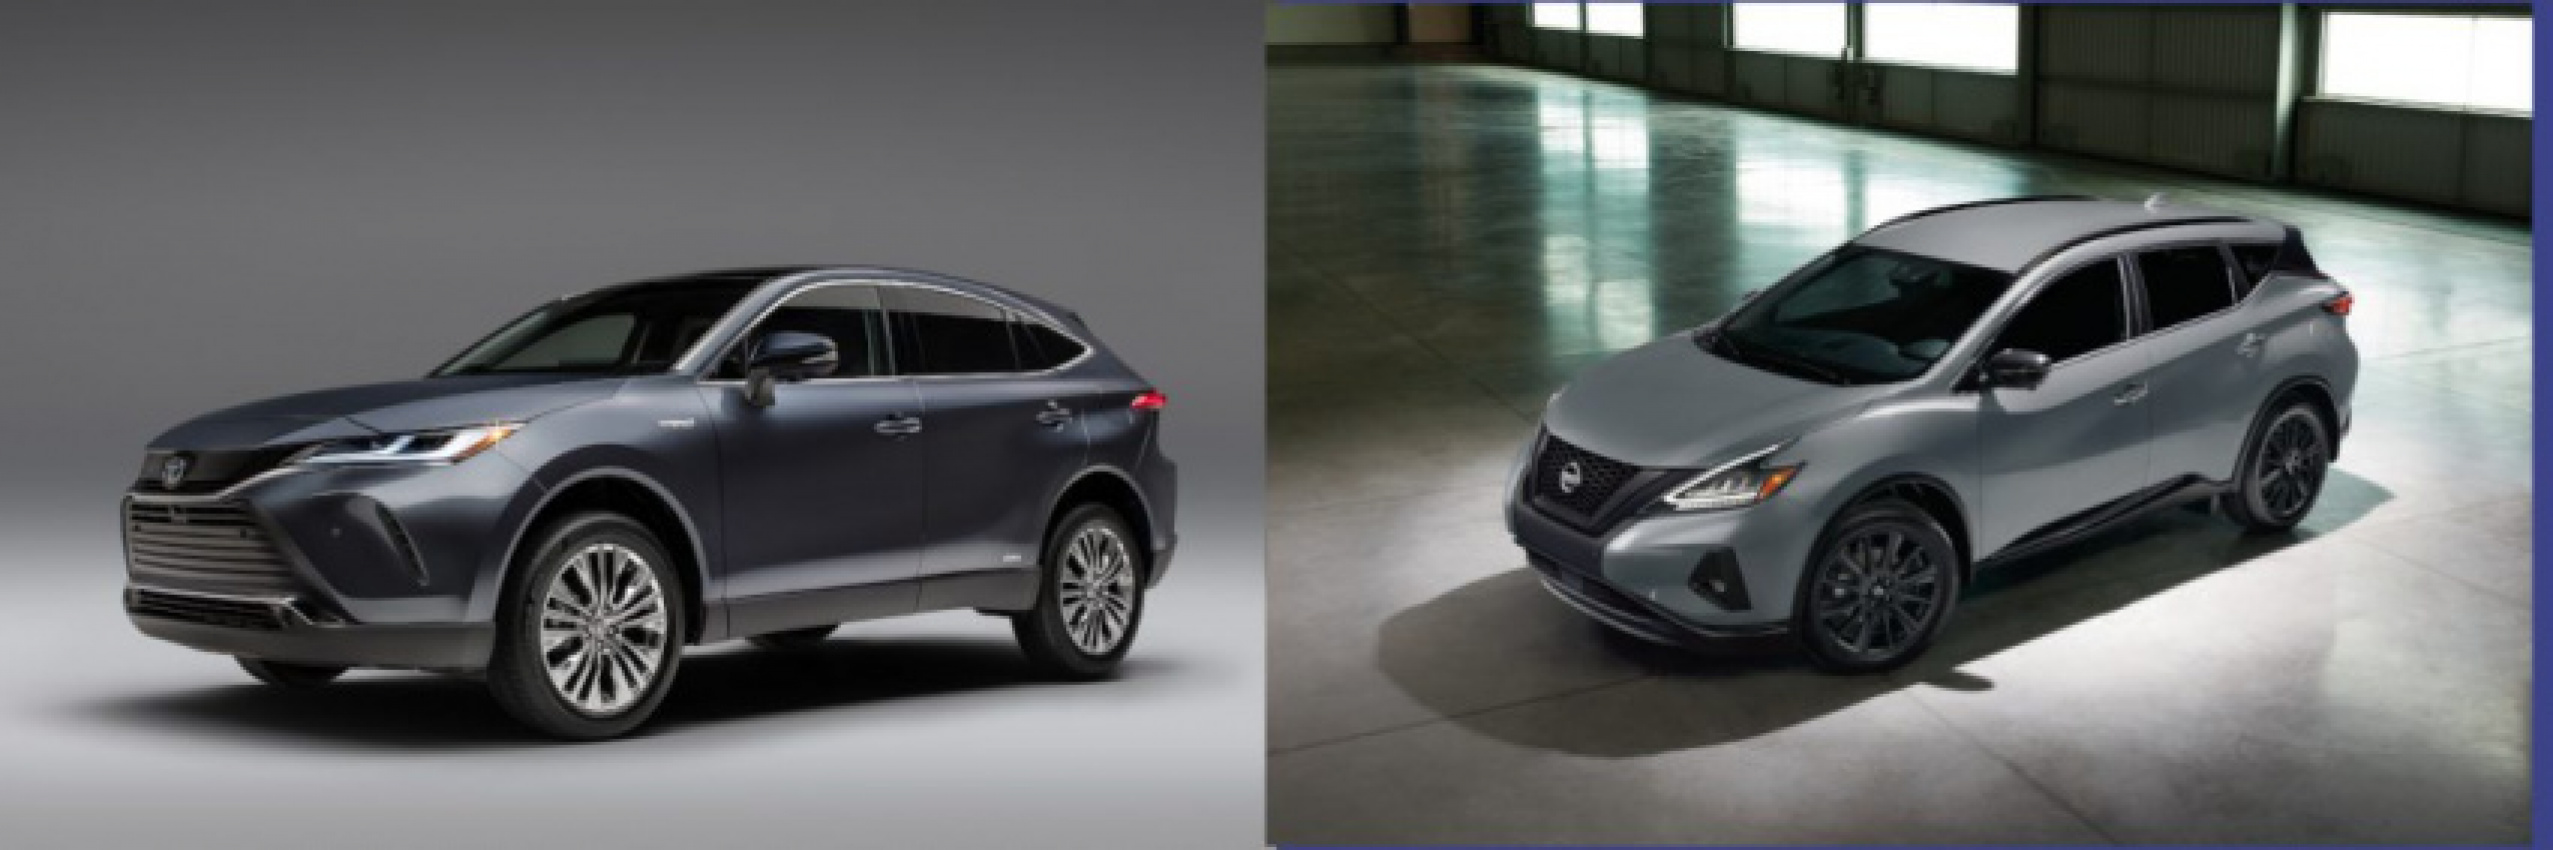 autos, cars, nissan, toyota, crossovers, nissan murano, toyota venza, toyota venza or nissan murano, which is the best suv for $33,000?